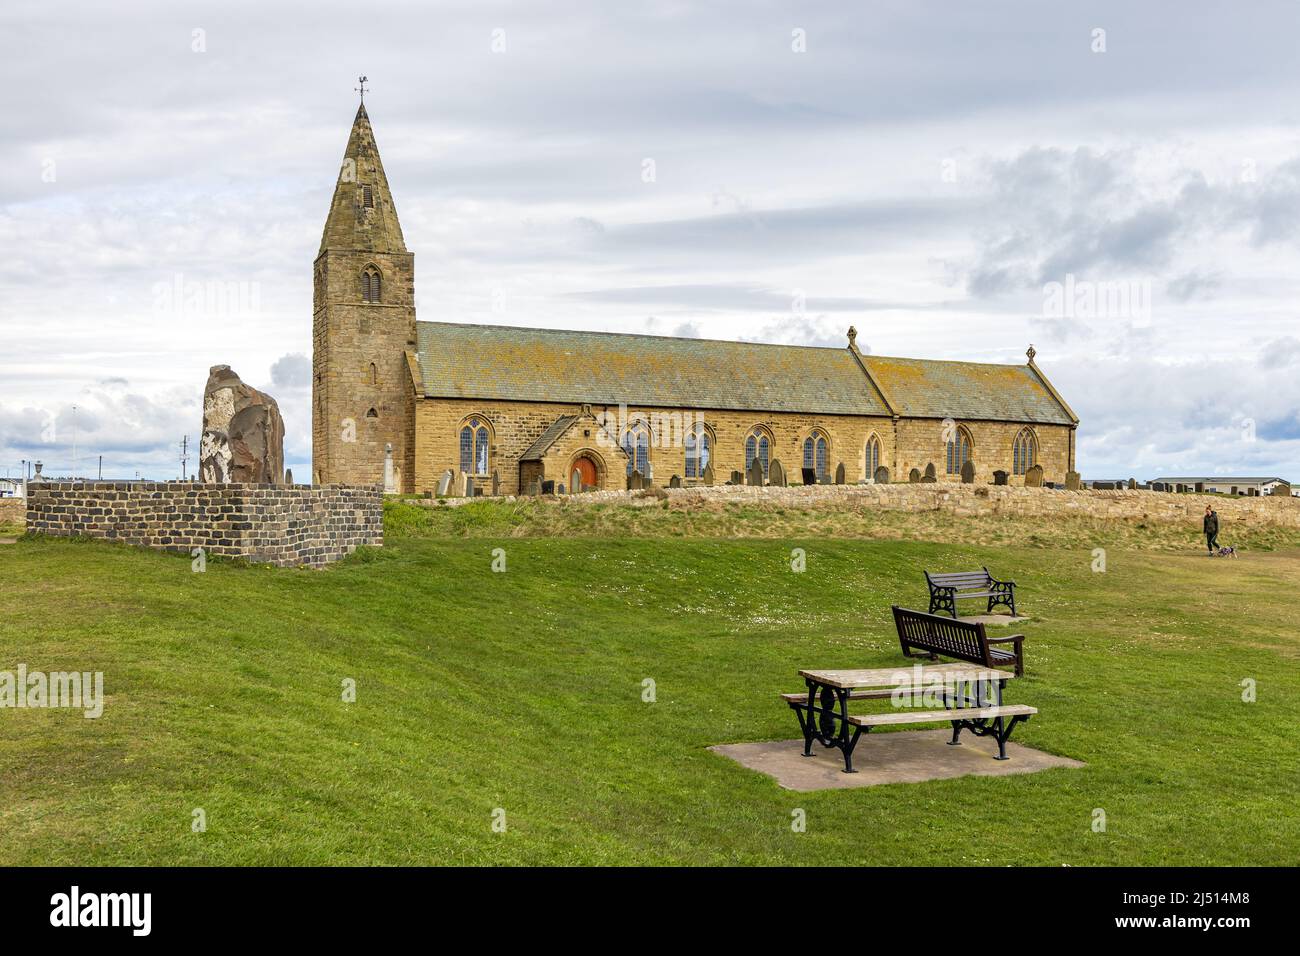 St Bartholomew's Church at Newbiggin-by-the-Sea, Northumberland, England.  It has a prominent position on Church Point headland. Stock Photo